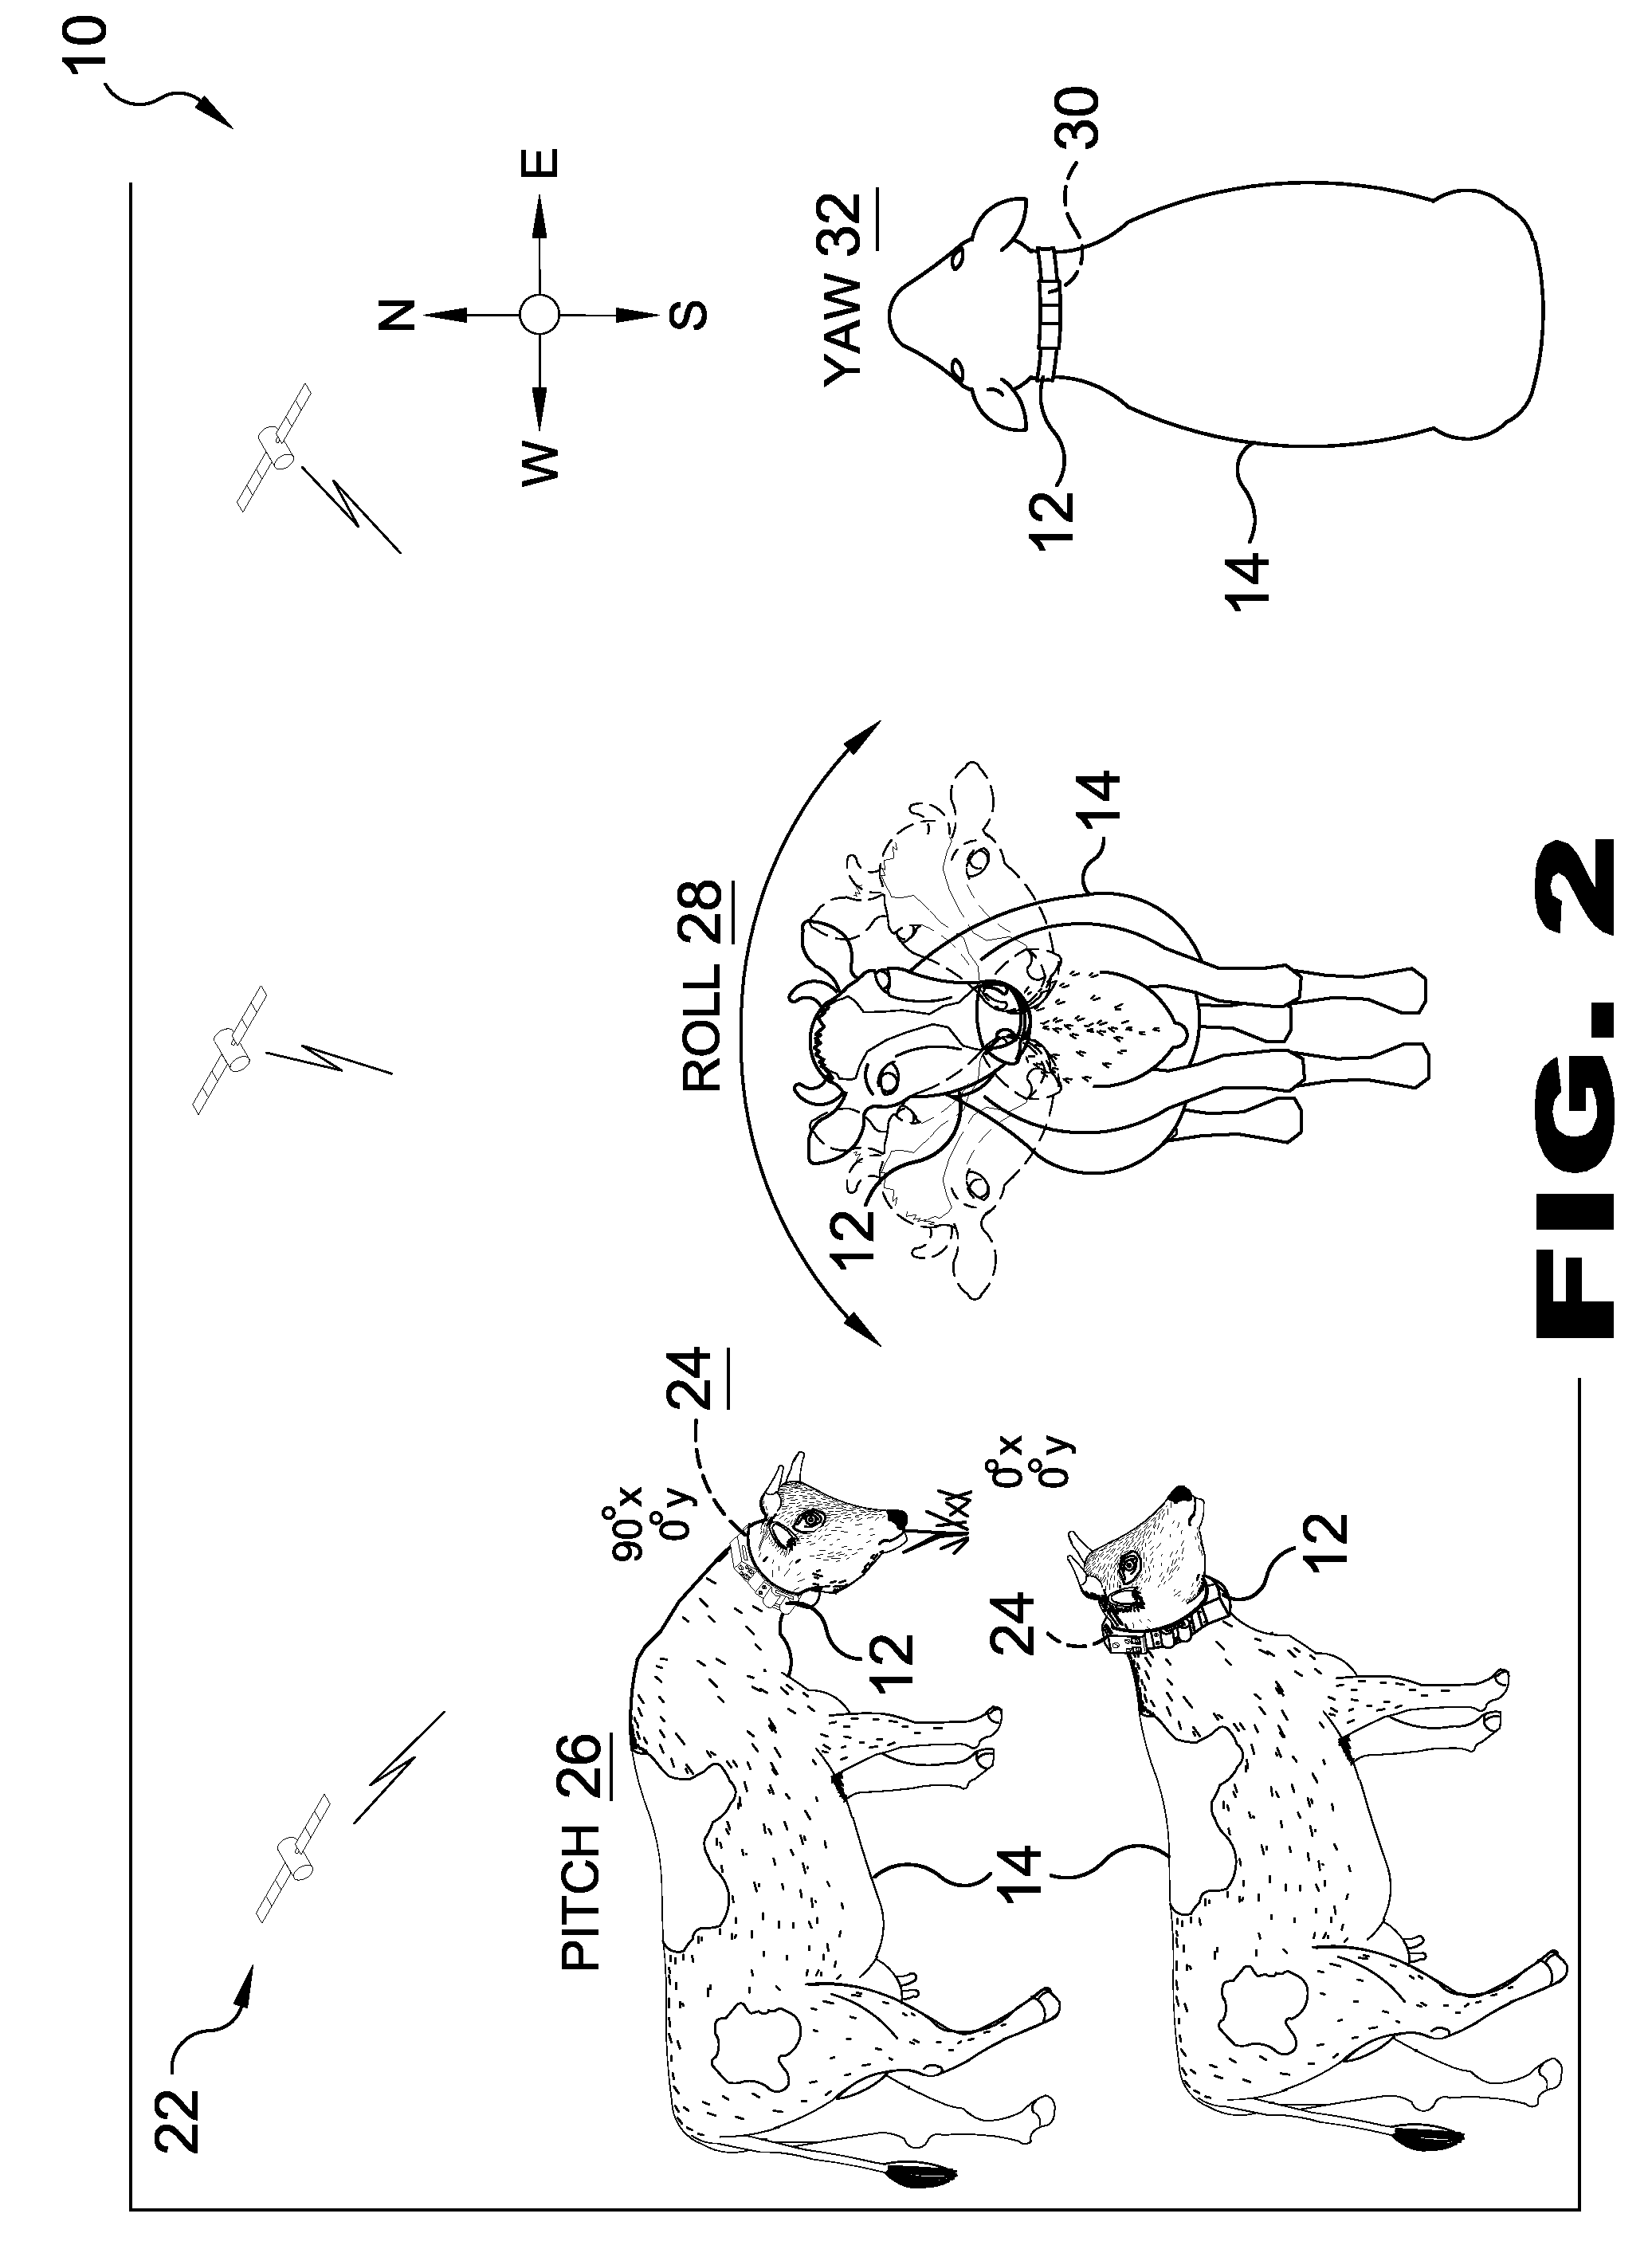 Method and apparatus for data logging of physiological and environmental variables for domestic and feral animals